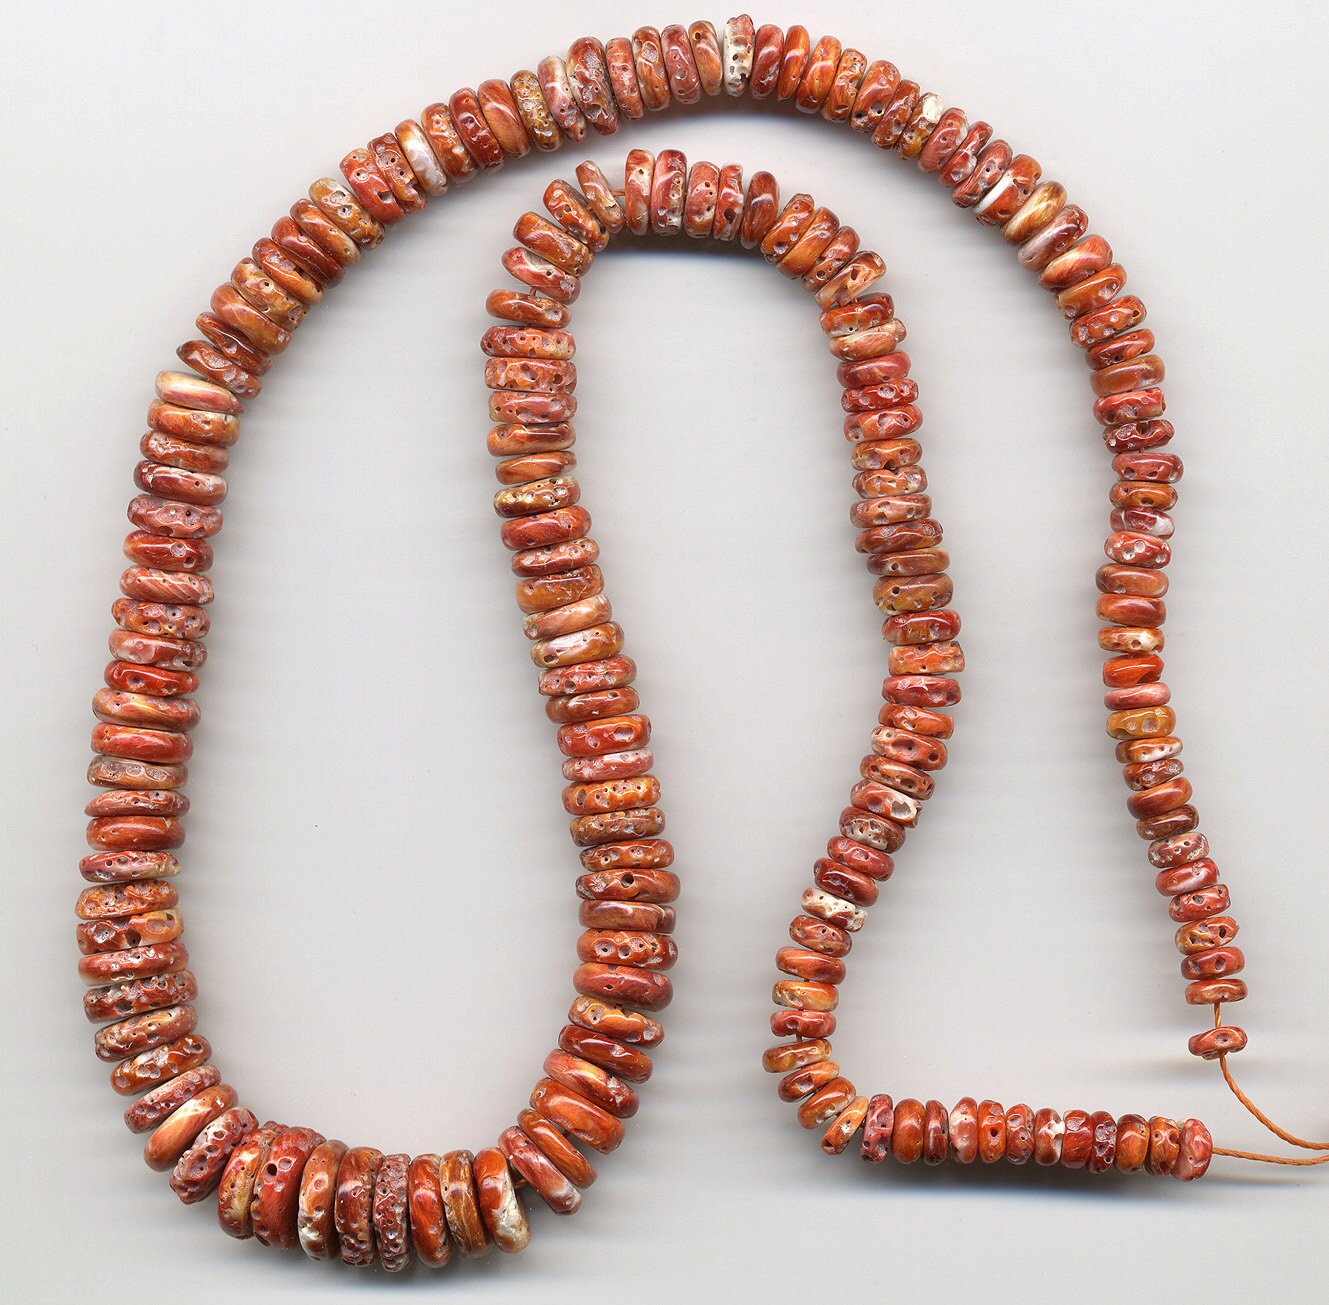 Spiny Oyster Shell Beads Natural Red Orange Color by eastofoz